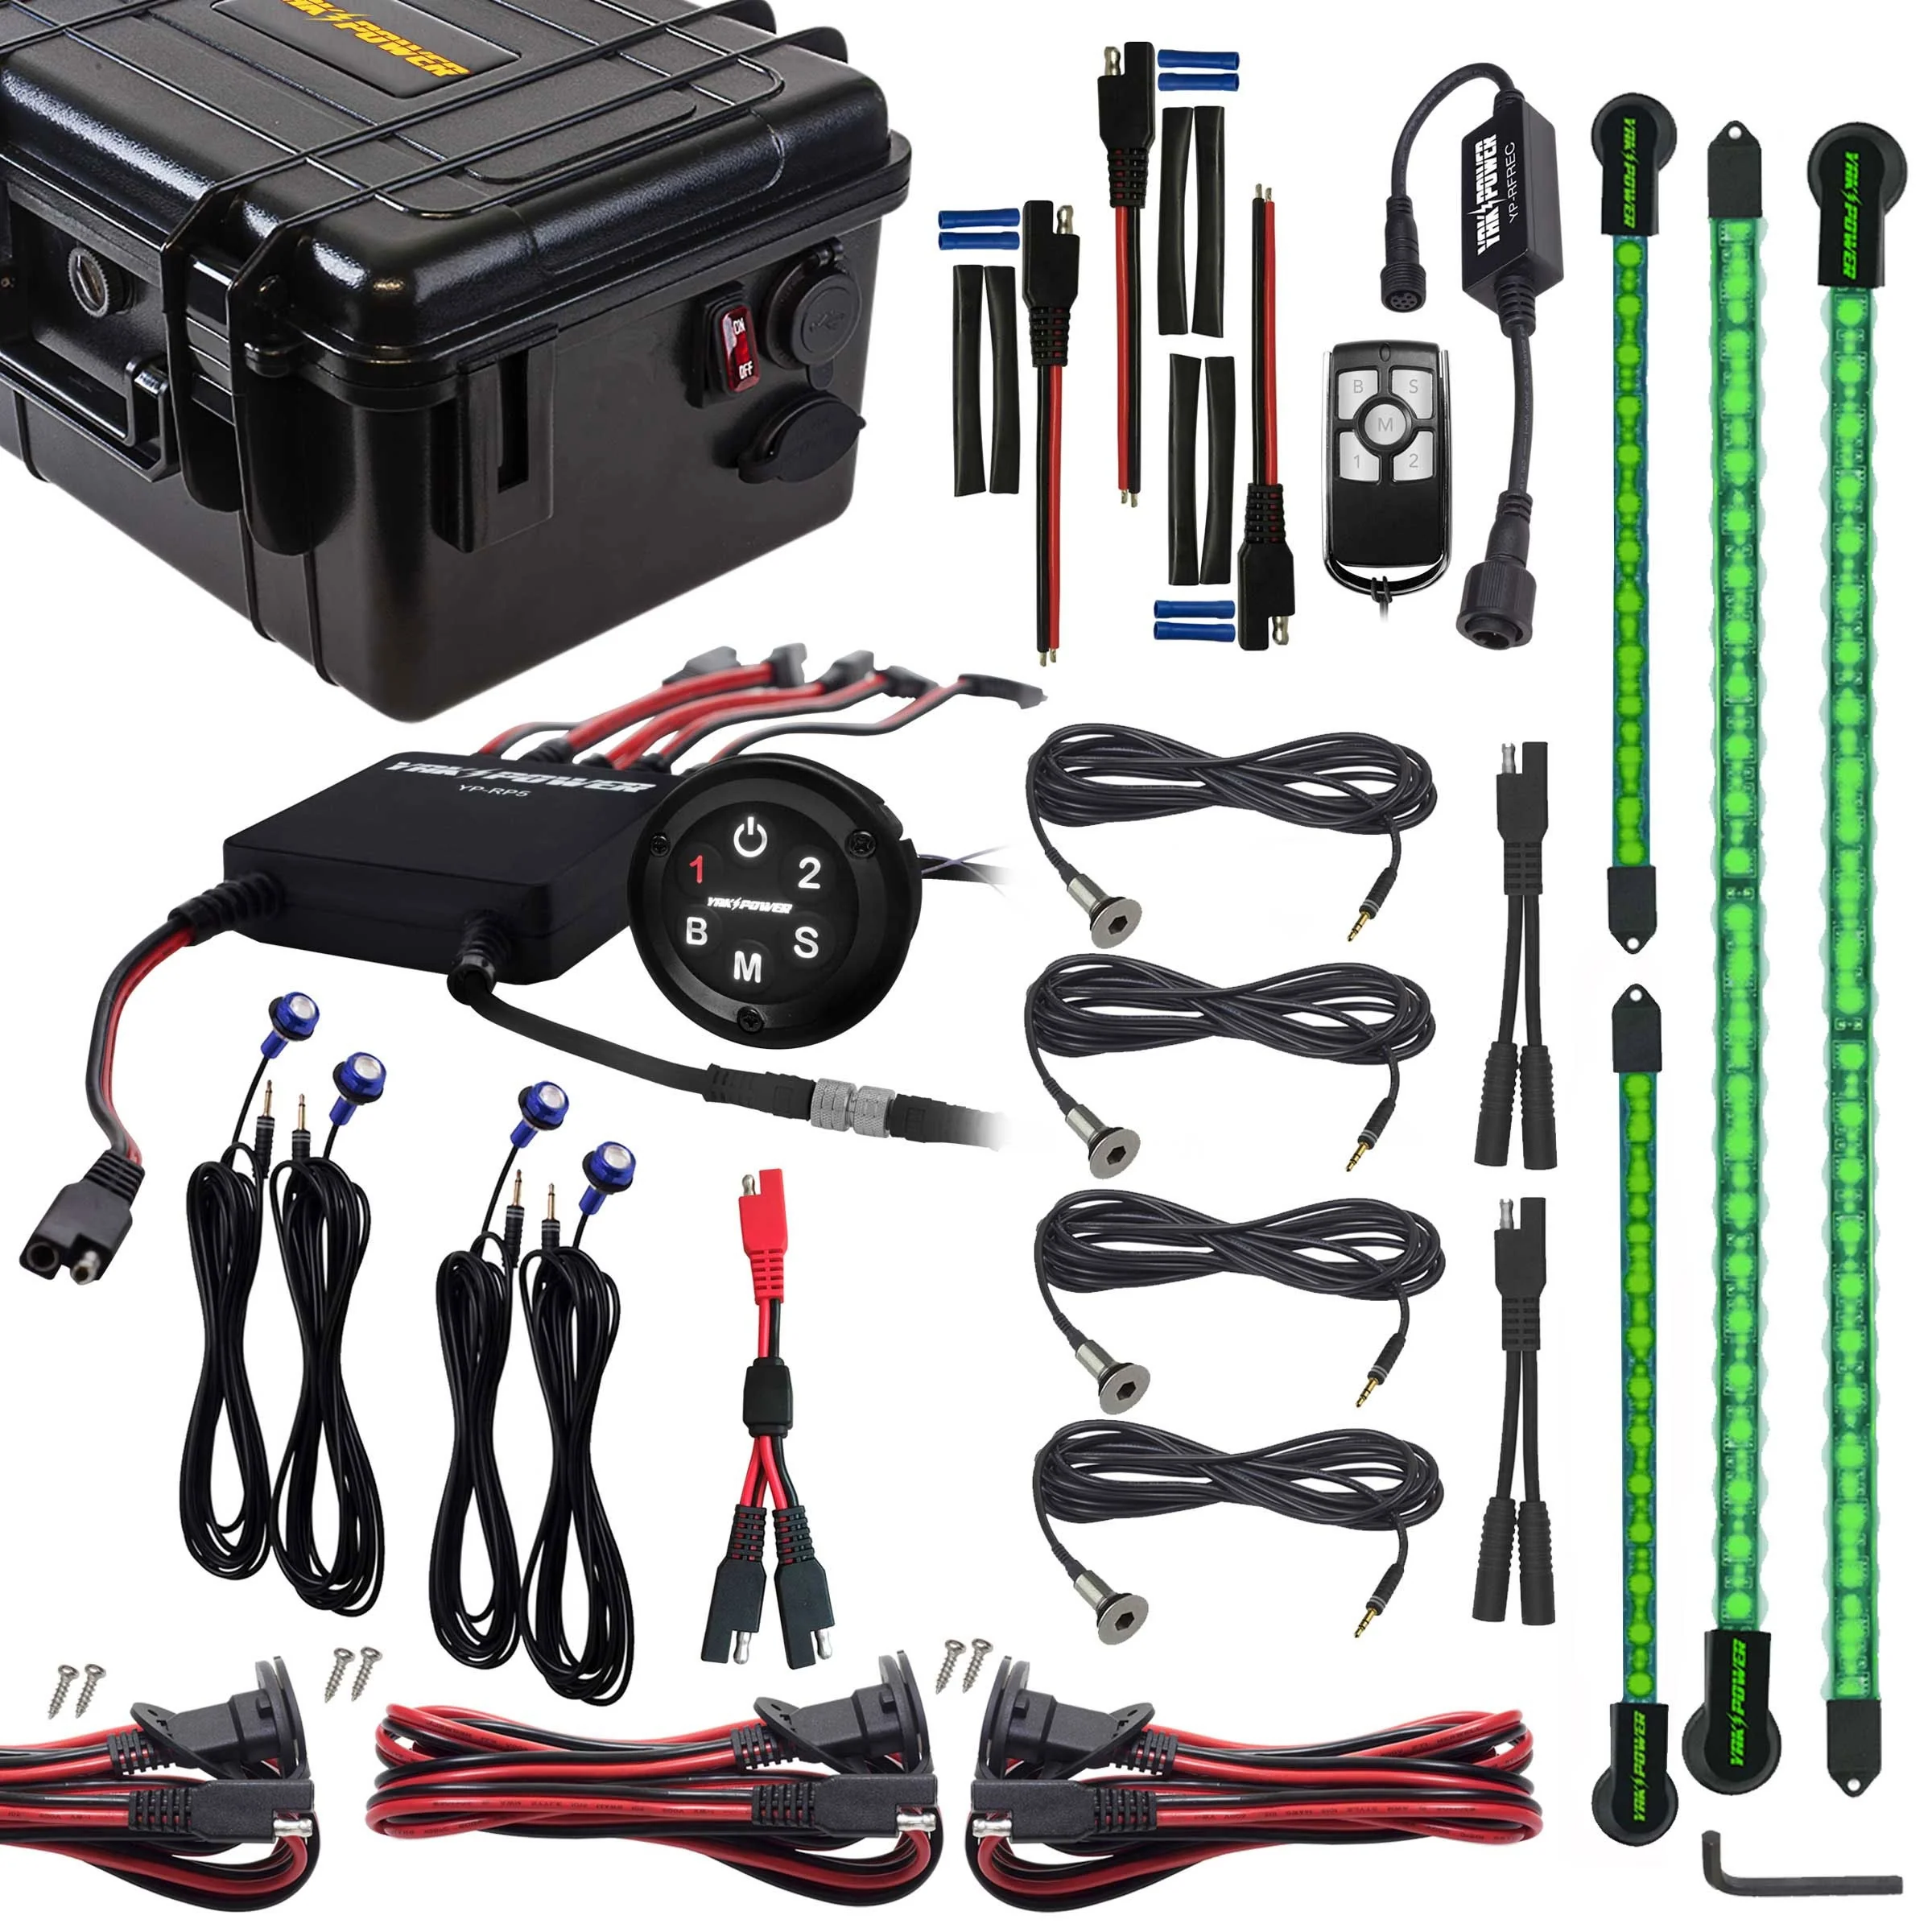 I want to get this YP-RP5PSCS ProStaff Complete System, but I want the green and red strip lights help please